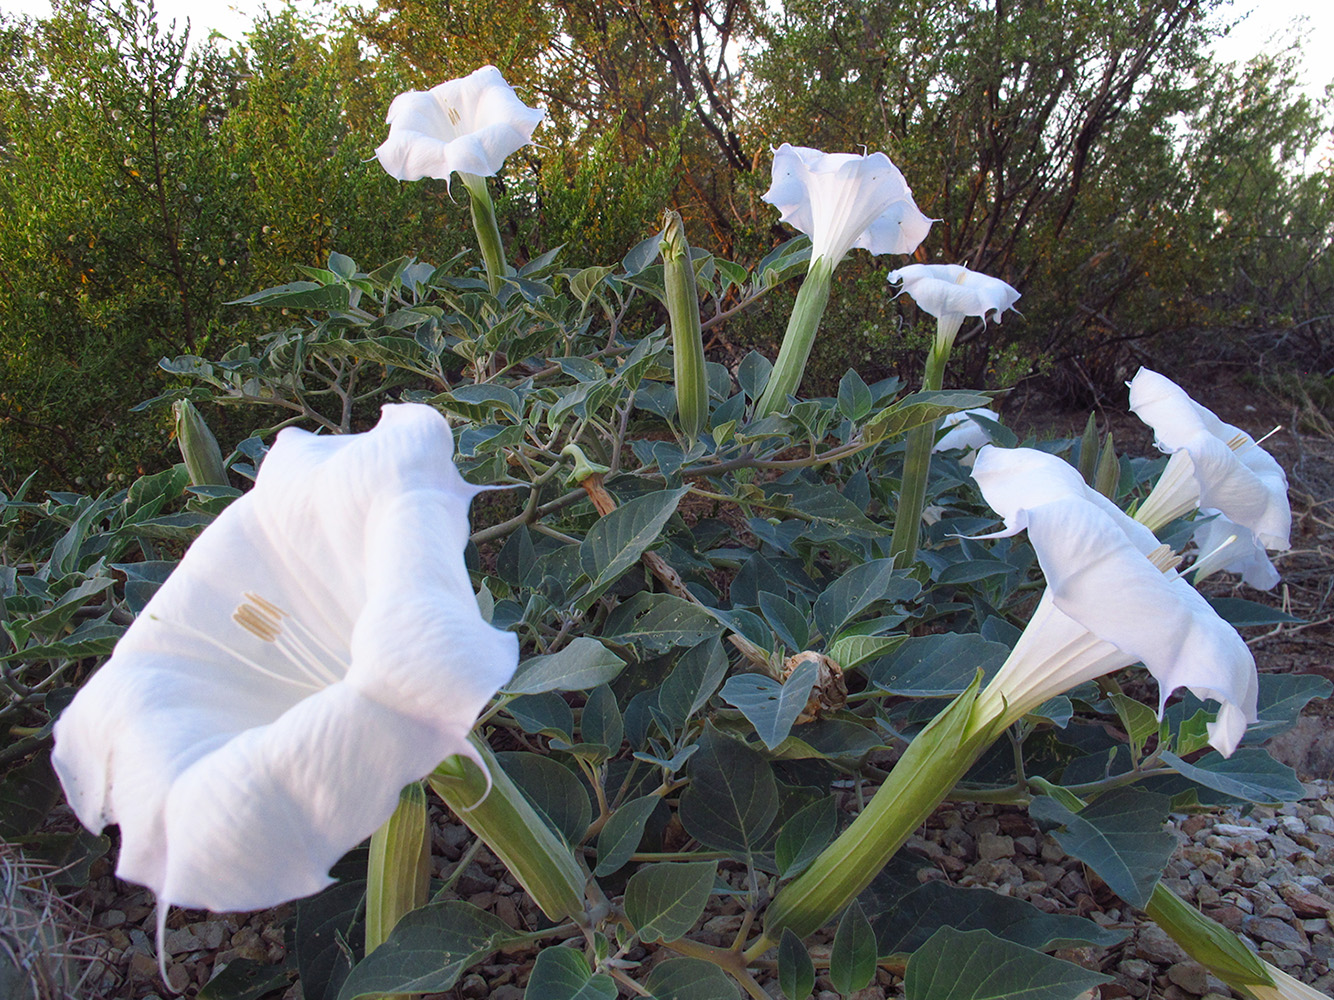 Side view of white bell-shaped flowers on a large spreading plant base with large leaves.